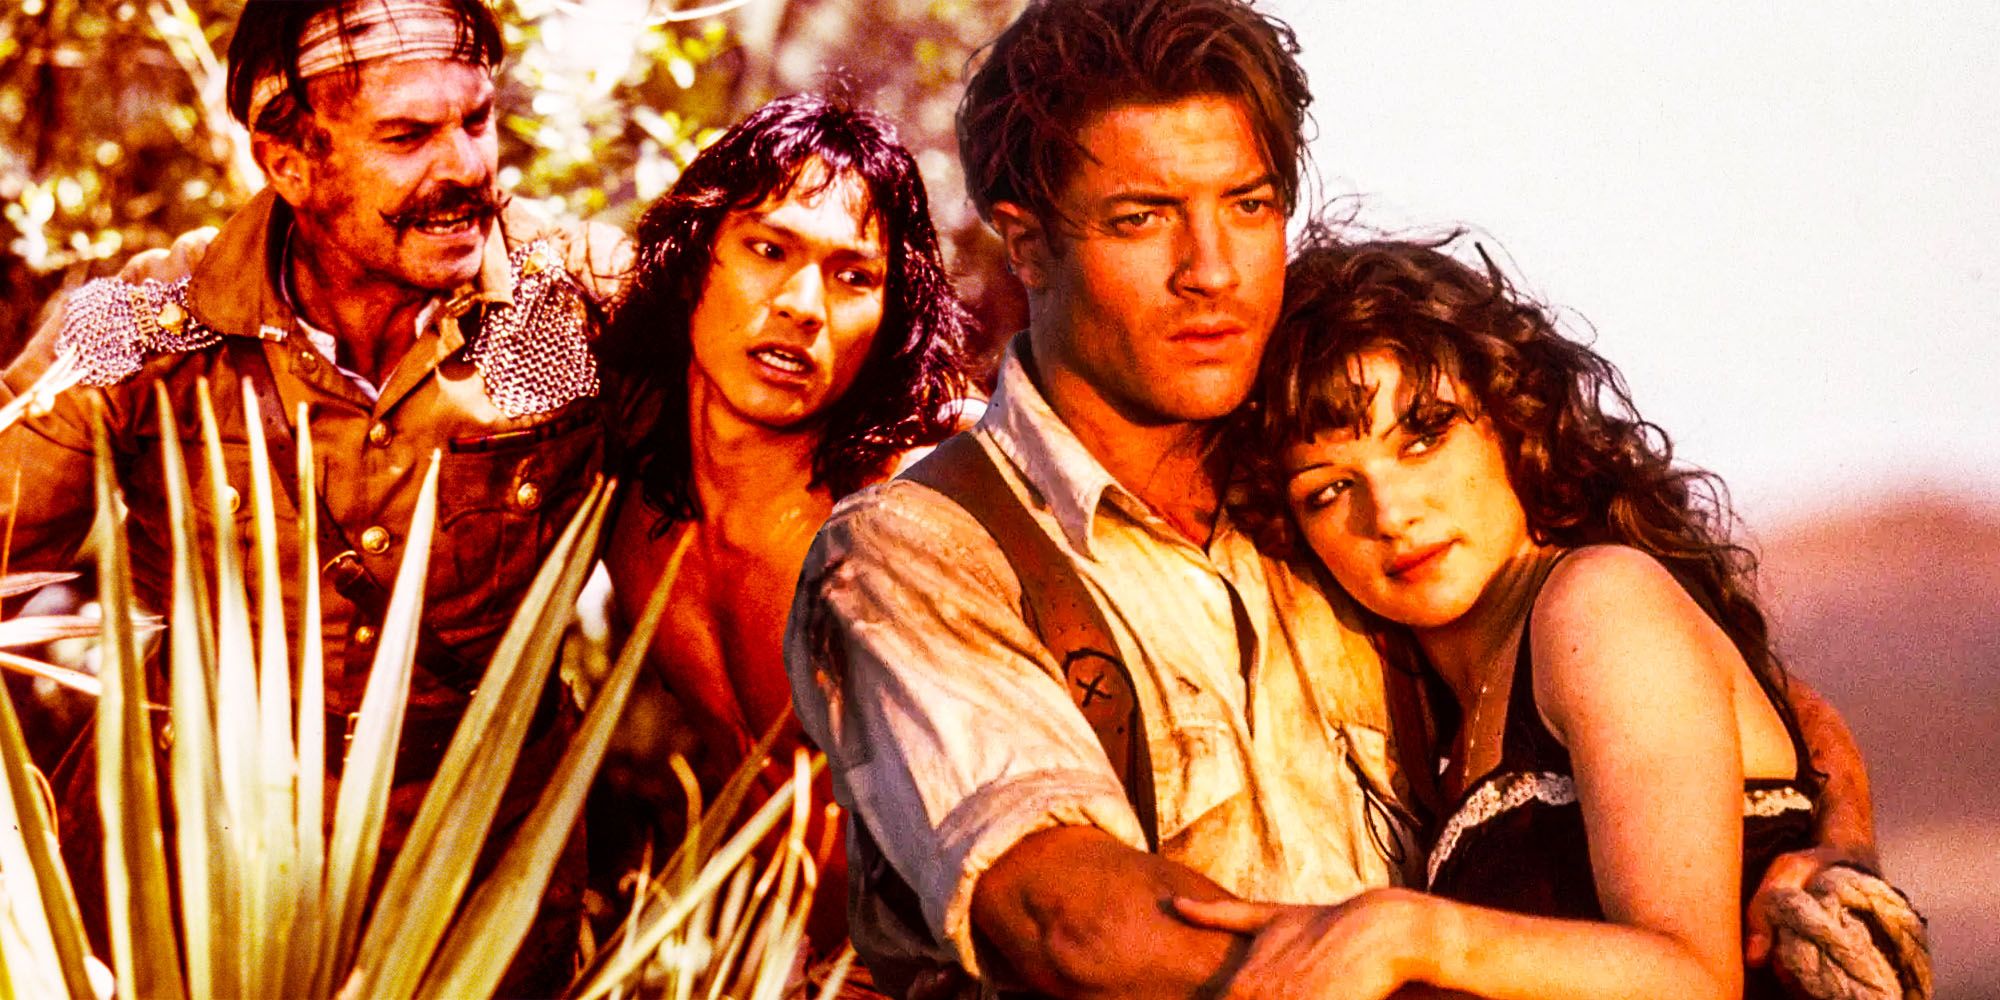 The '90s Mummy & Jungle Book Movies Are A Shared Universe - Theory Explained